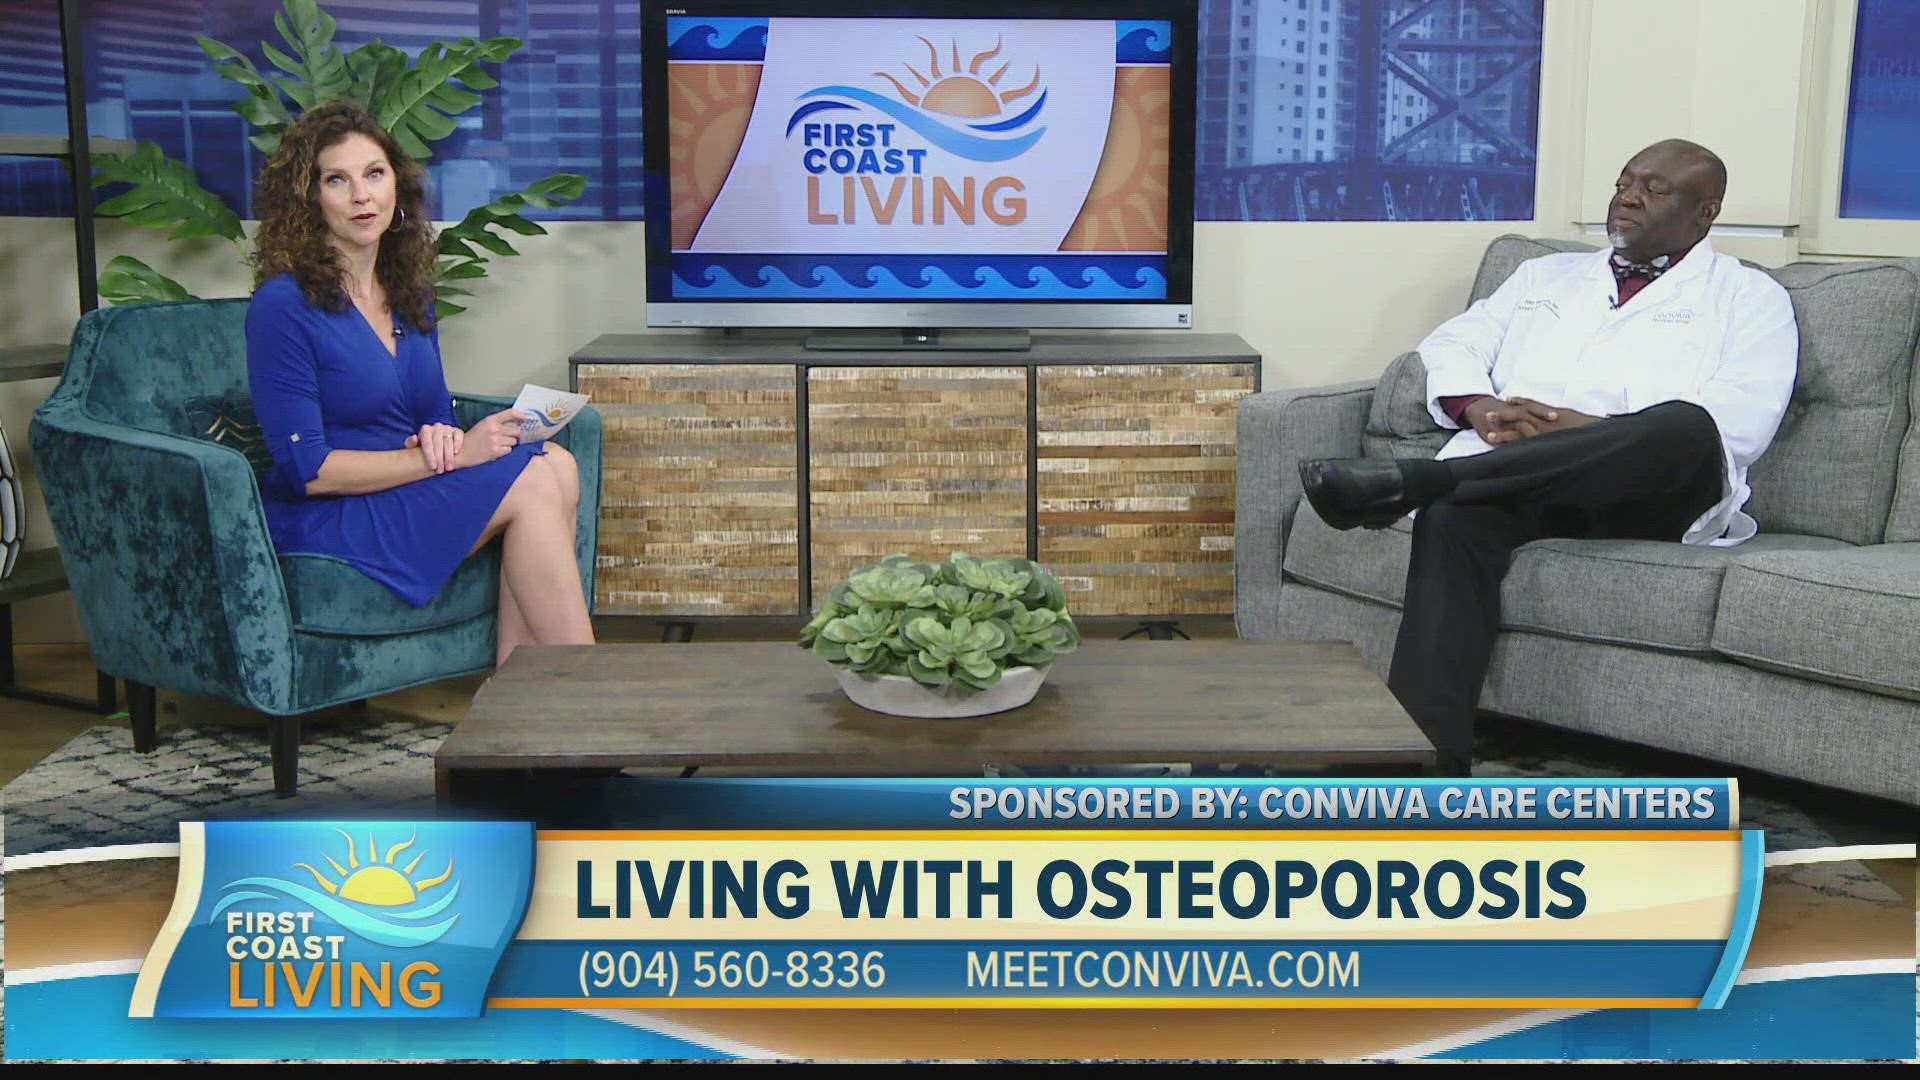 Typically, there are no symptoms in the early stages of bone loss. Dr. Alan Ekanem of Conviva shares ways to slow down or even prevent osteoporosis.